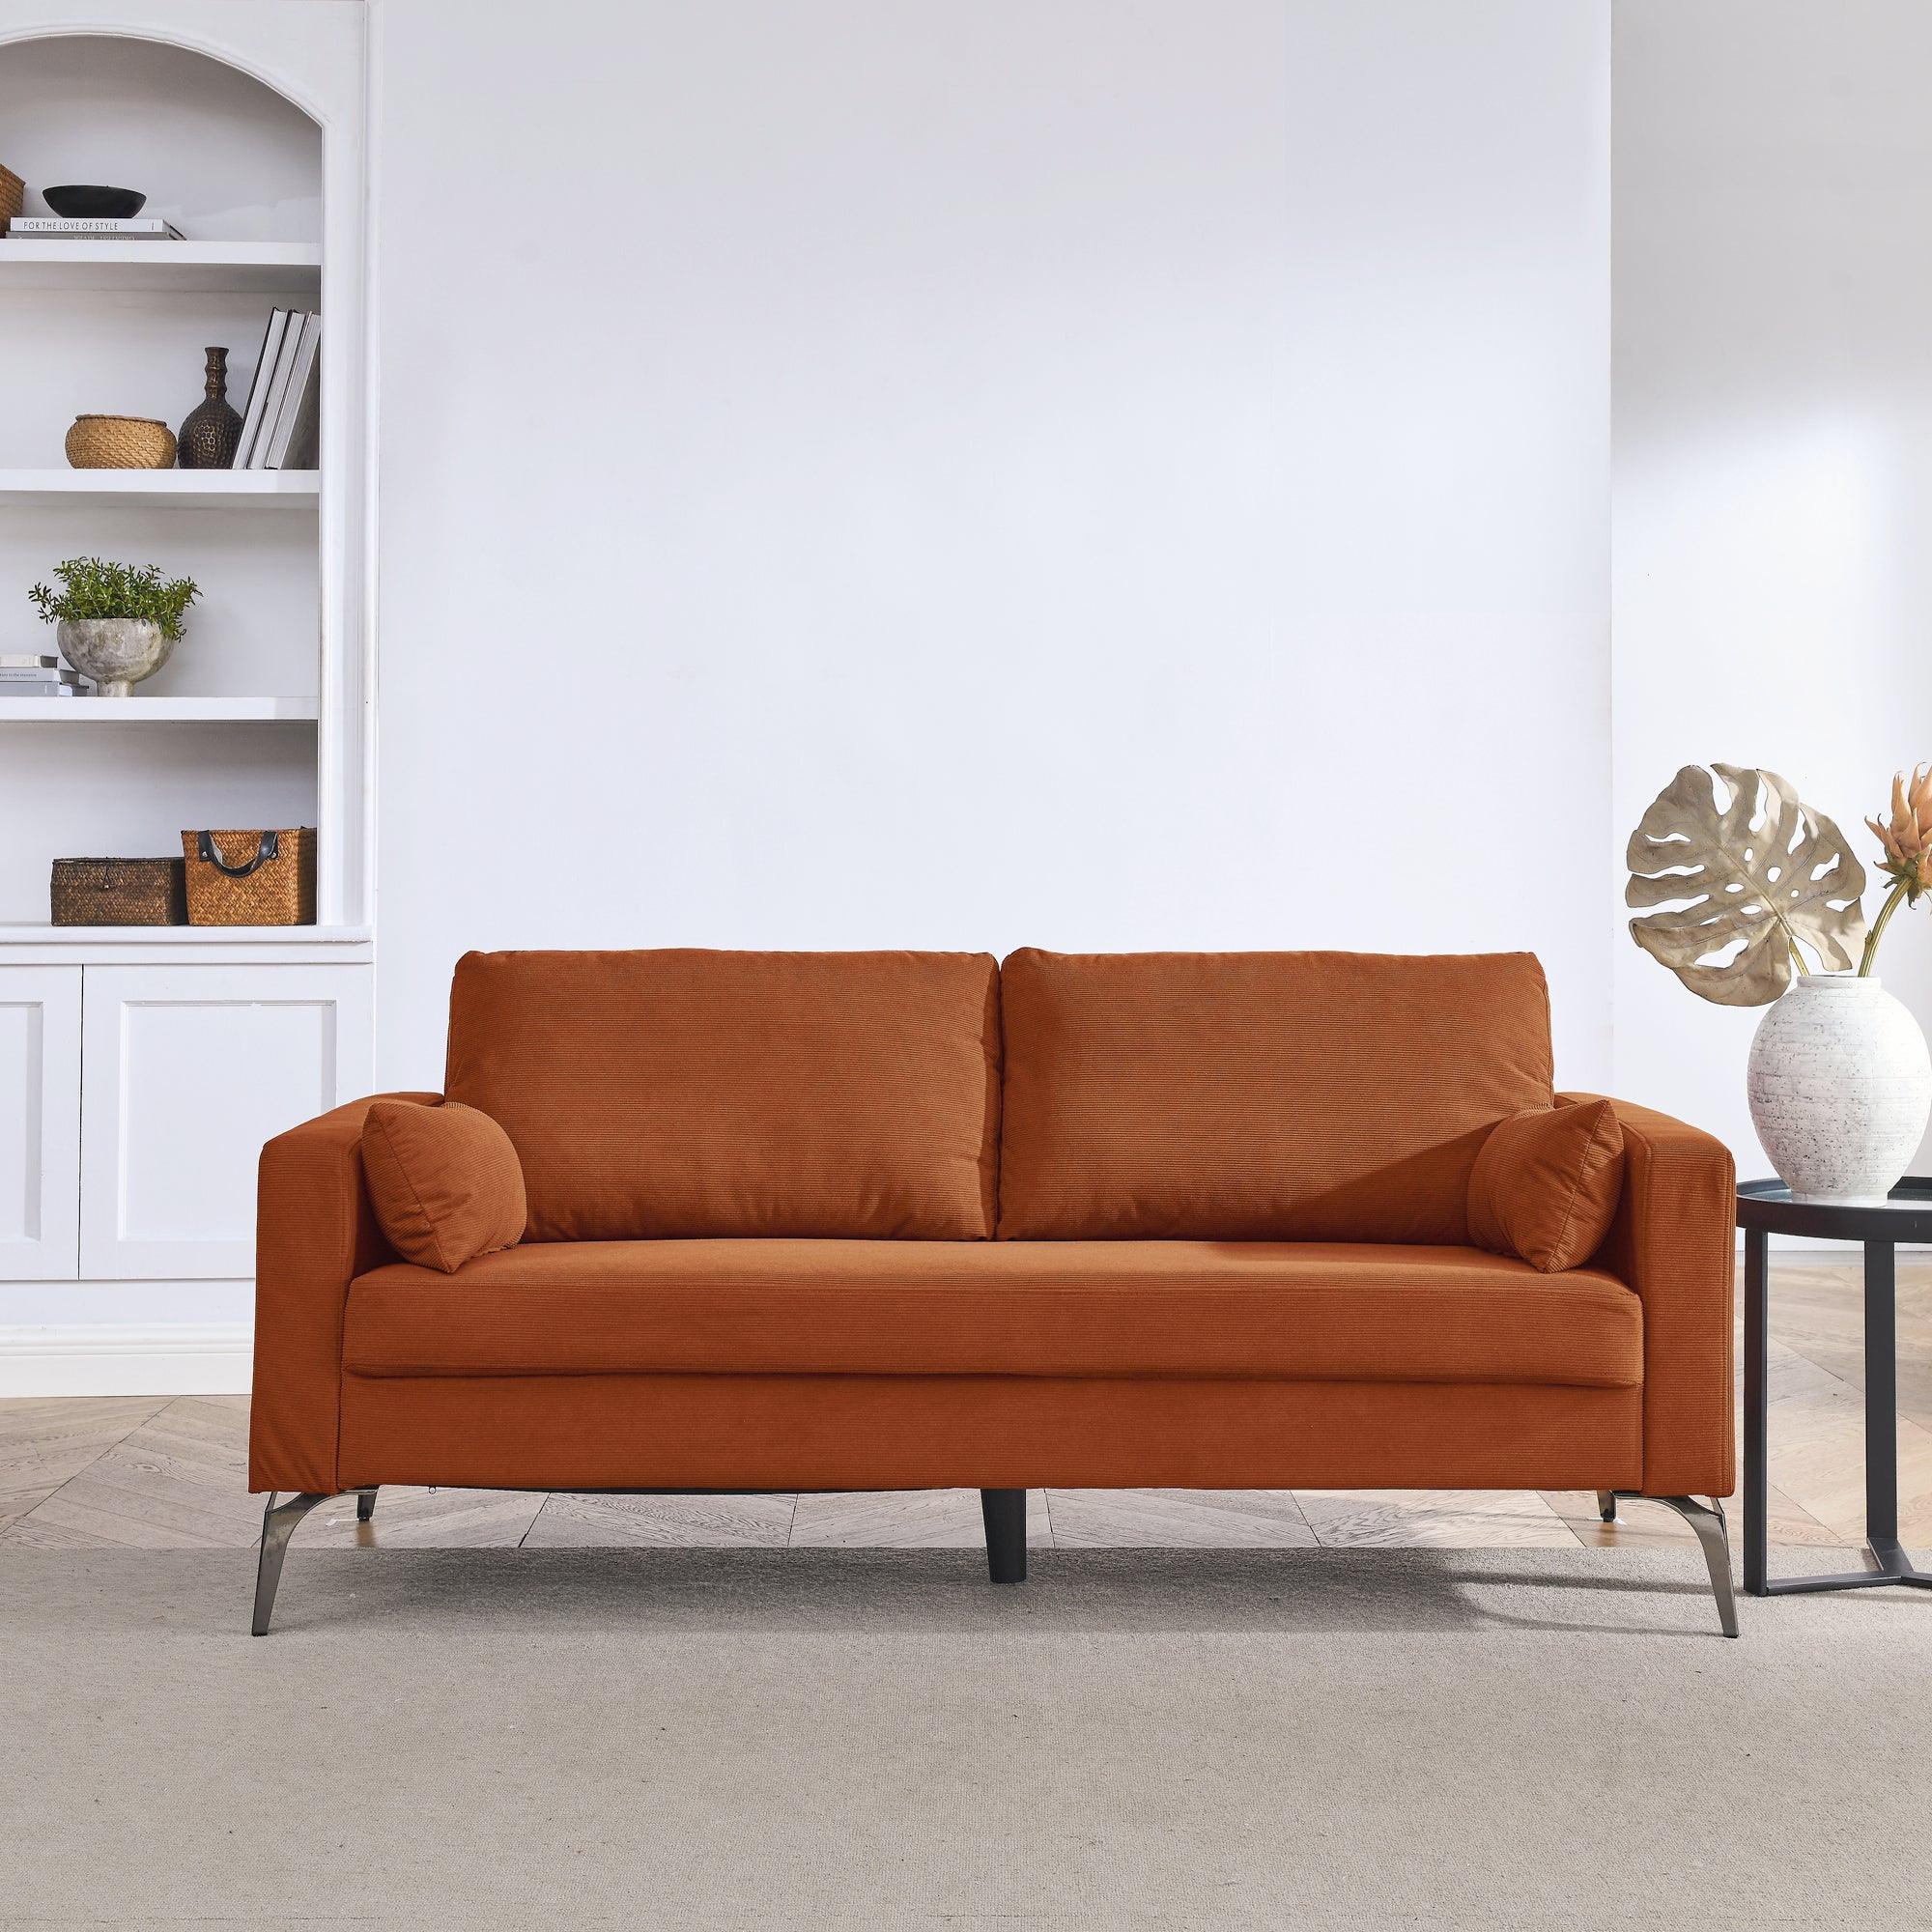 🆓🚛 3-Seater Sofa With Square Arms and Tight Back, With Two Small Pillows, Corduroy Orange